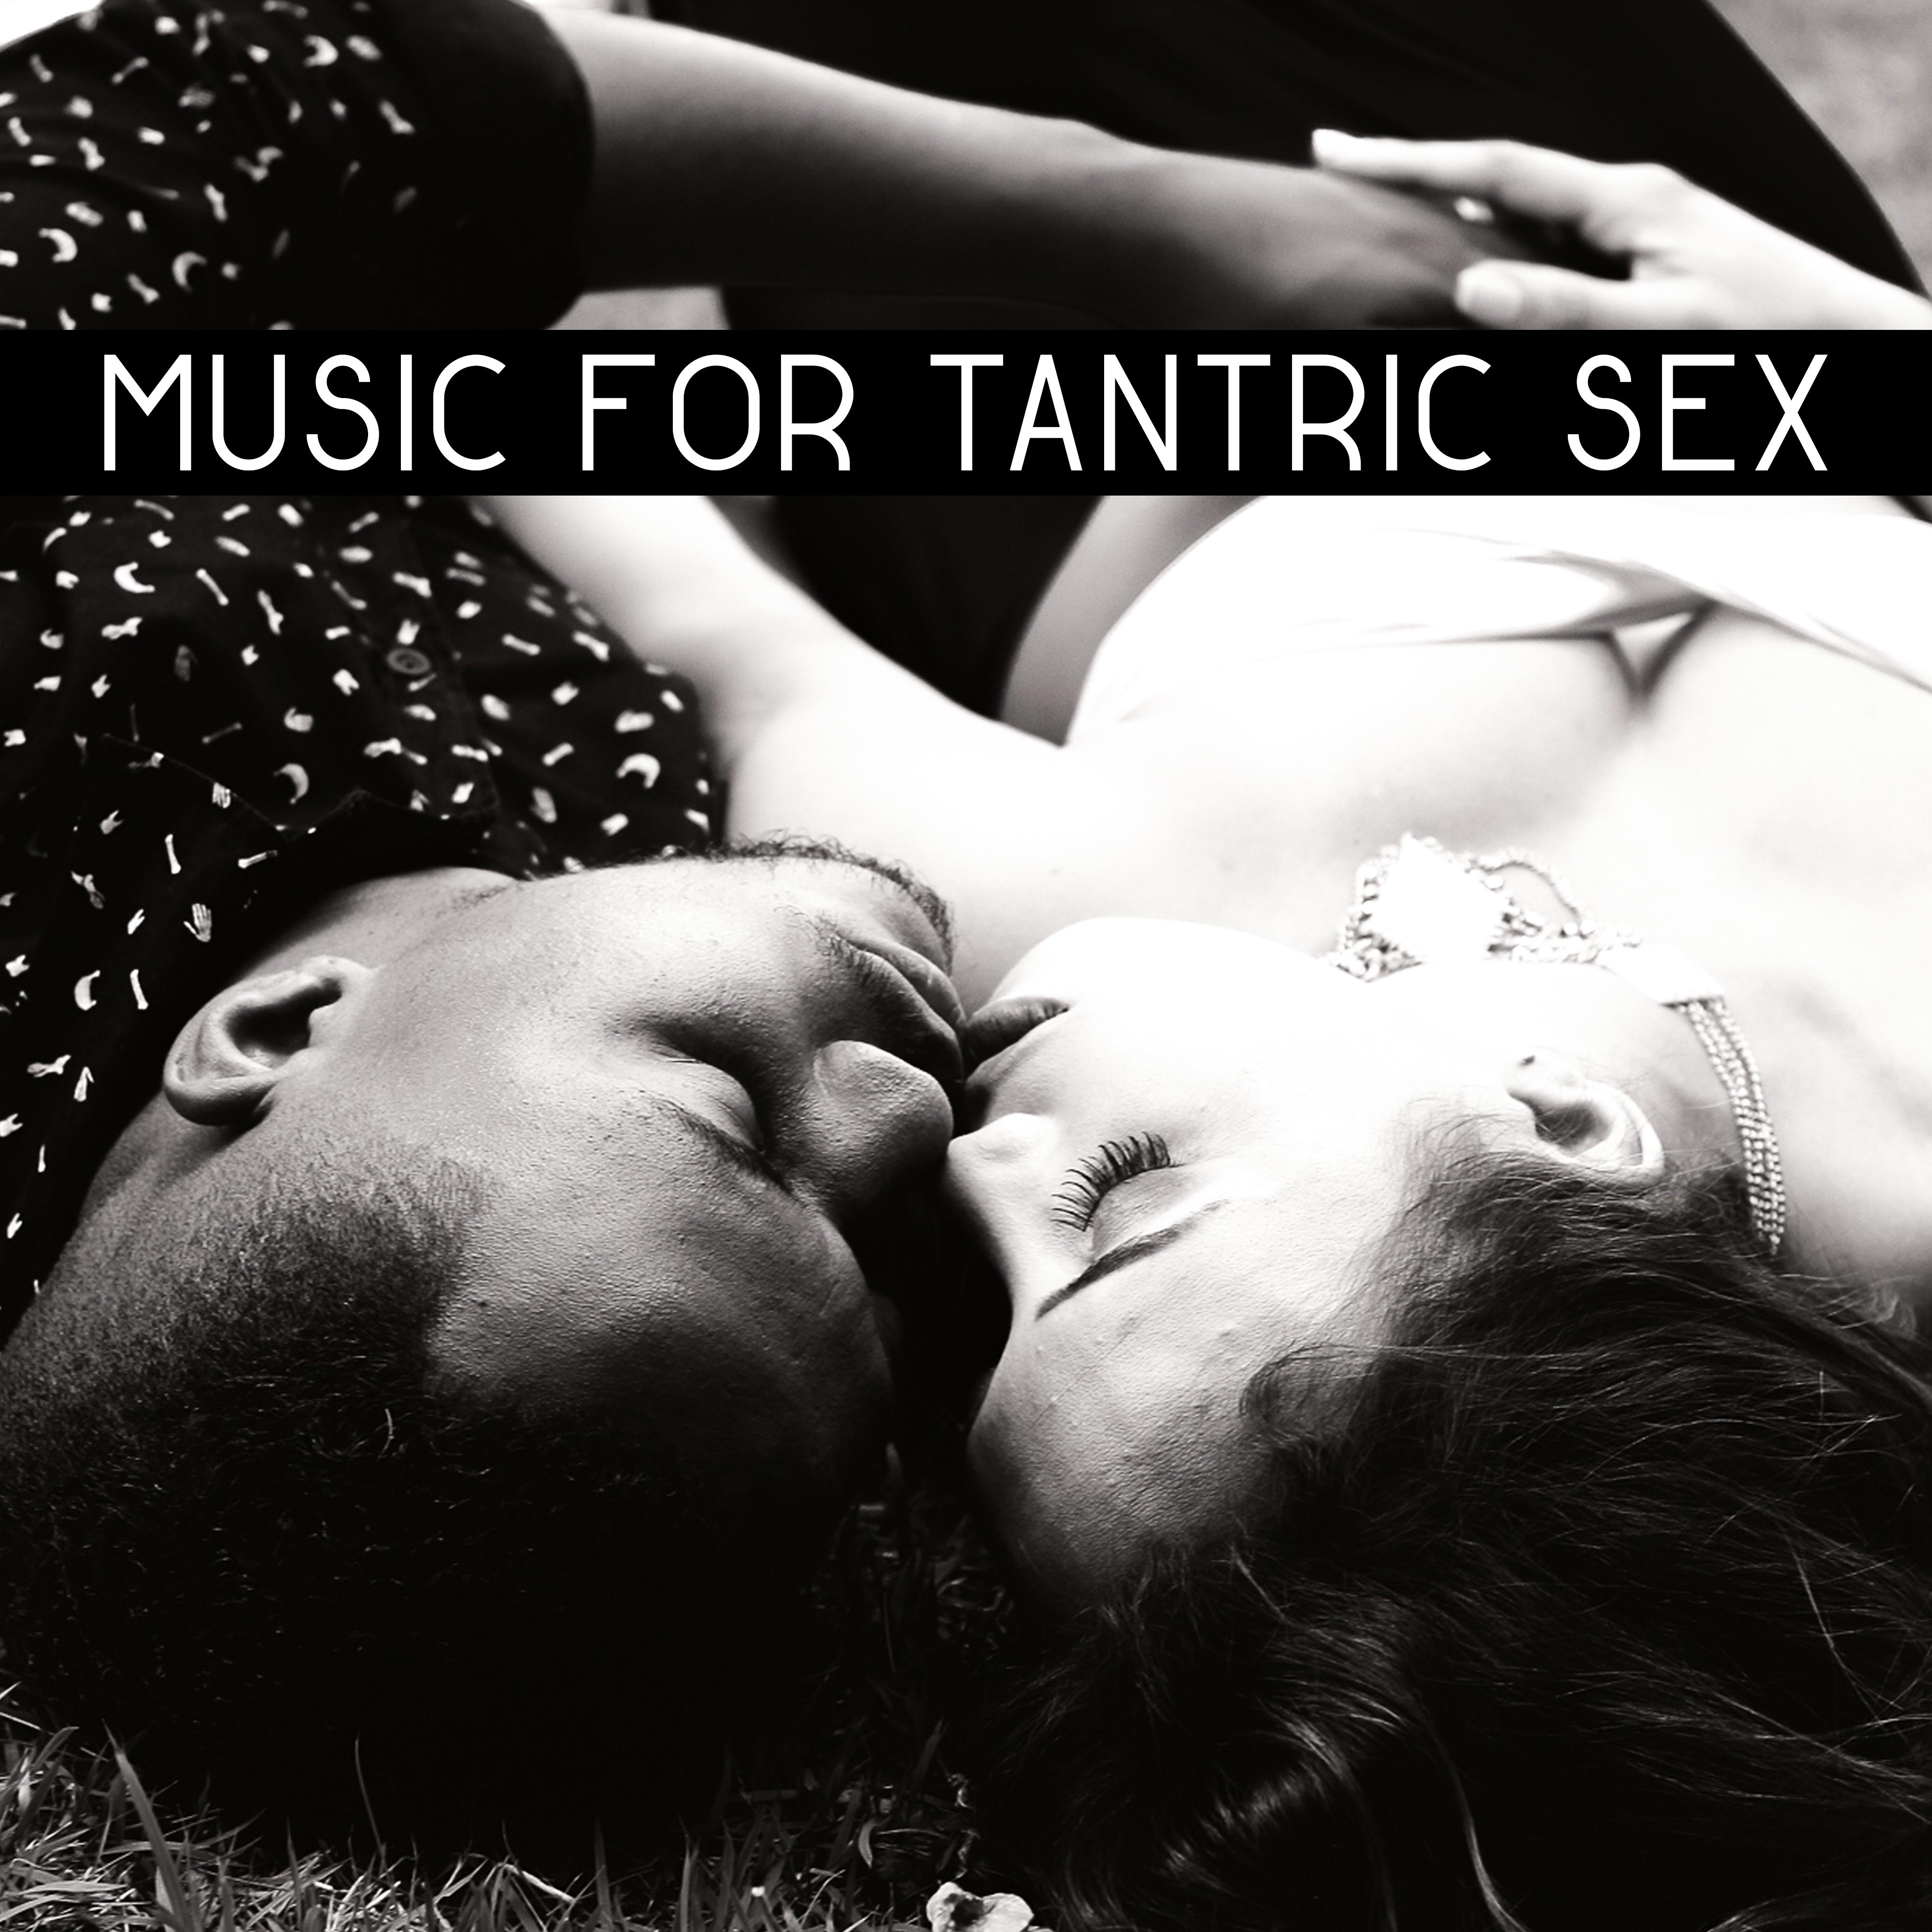 Music for Tantric  Erotic Games for Two, Sensual Massage, Making Love, Orgasm,  Songs, Relax for Two, Erotic Lounge